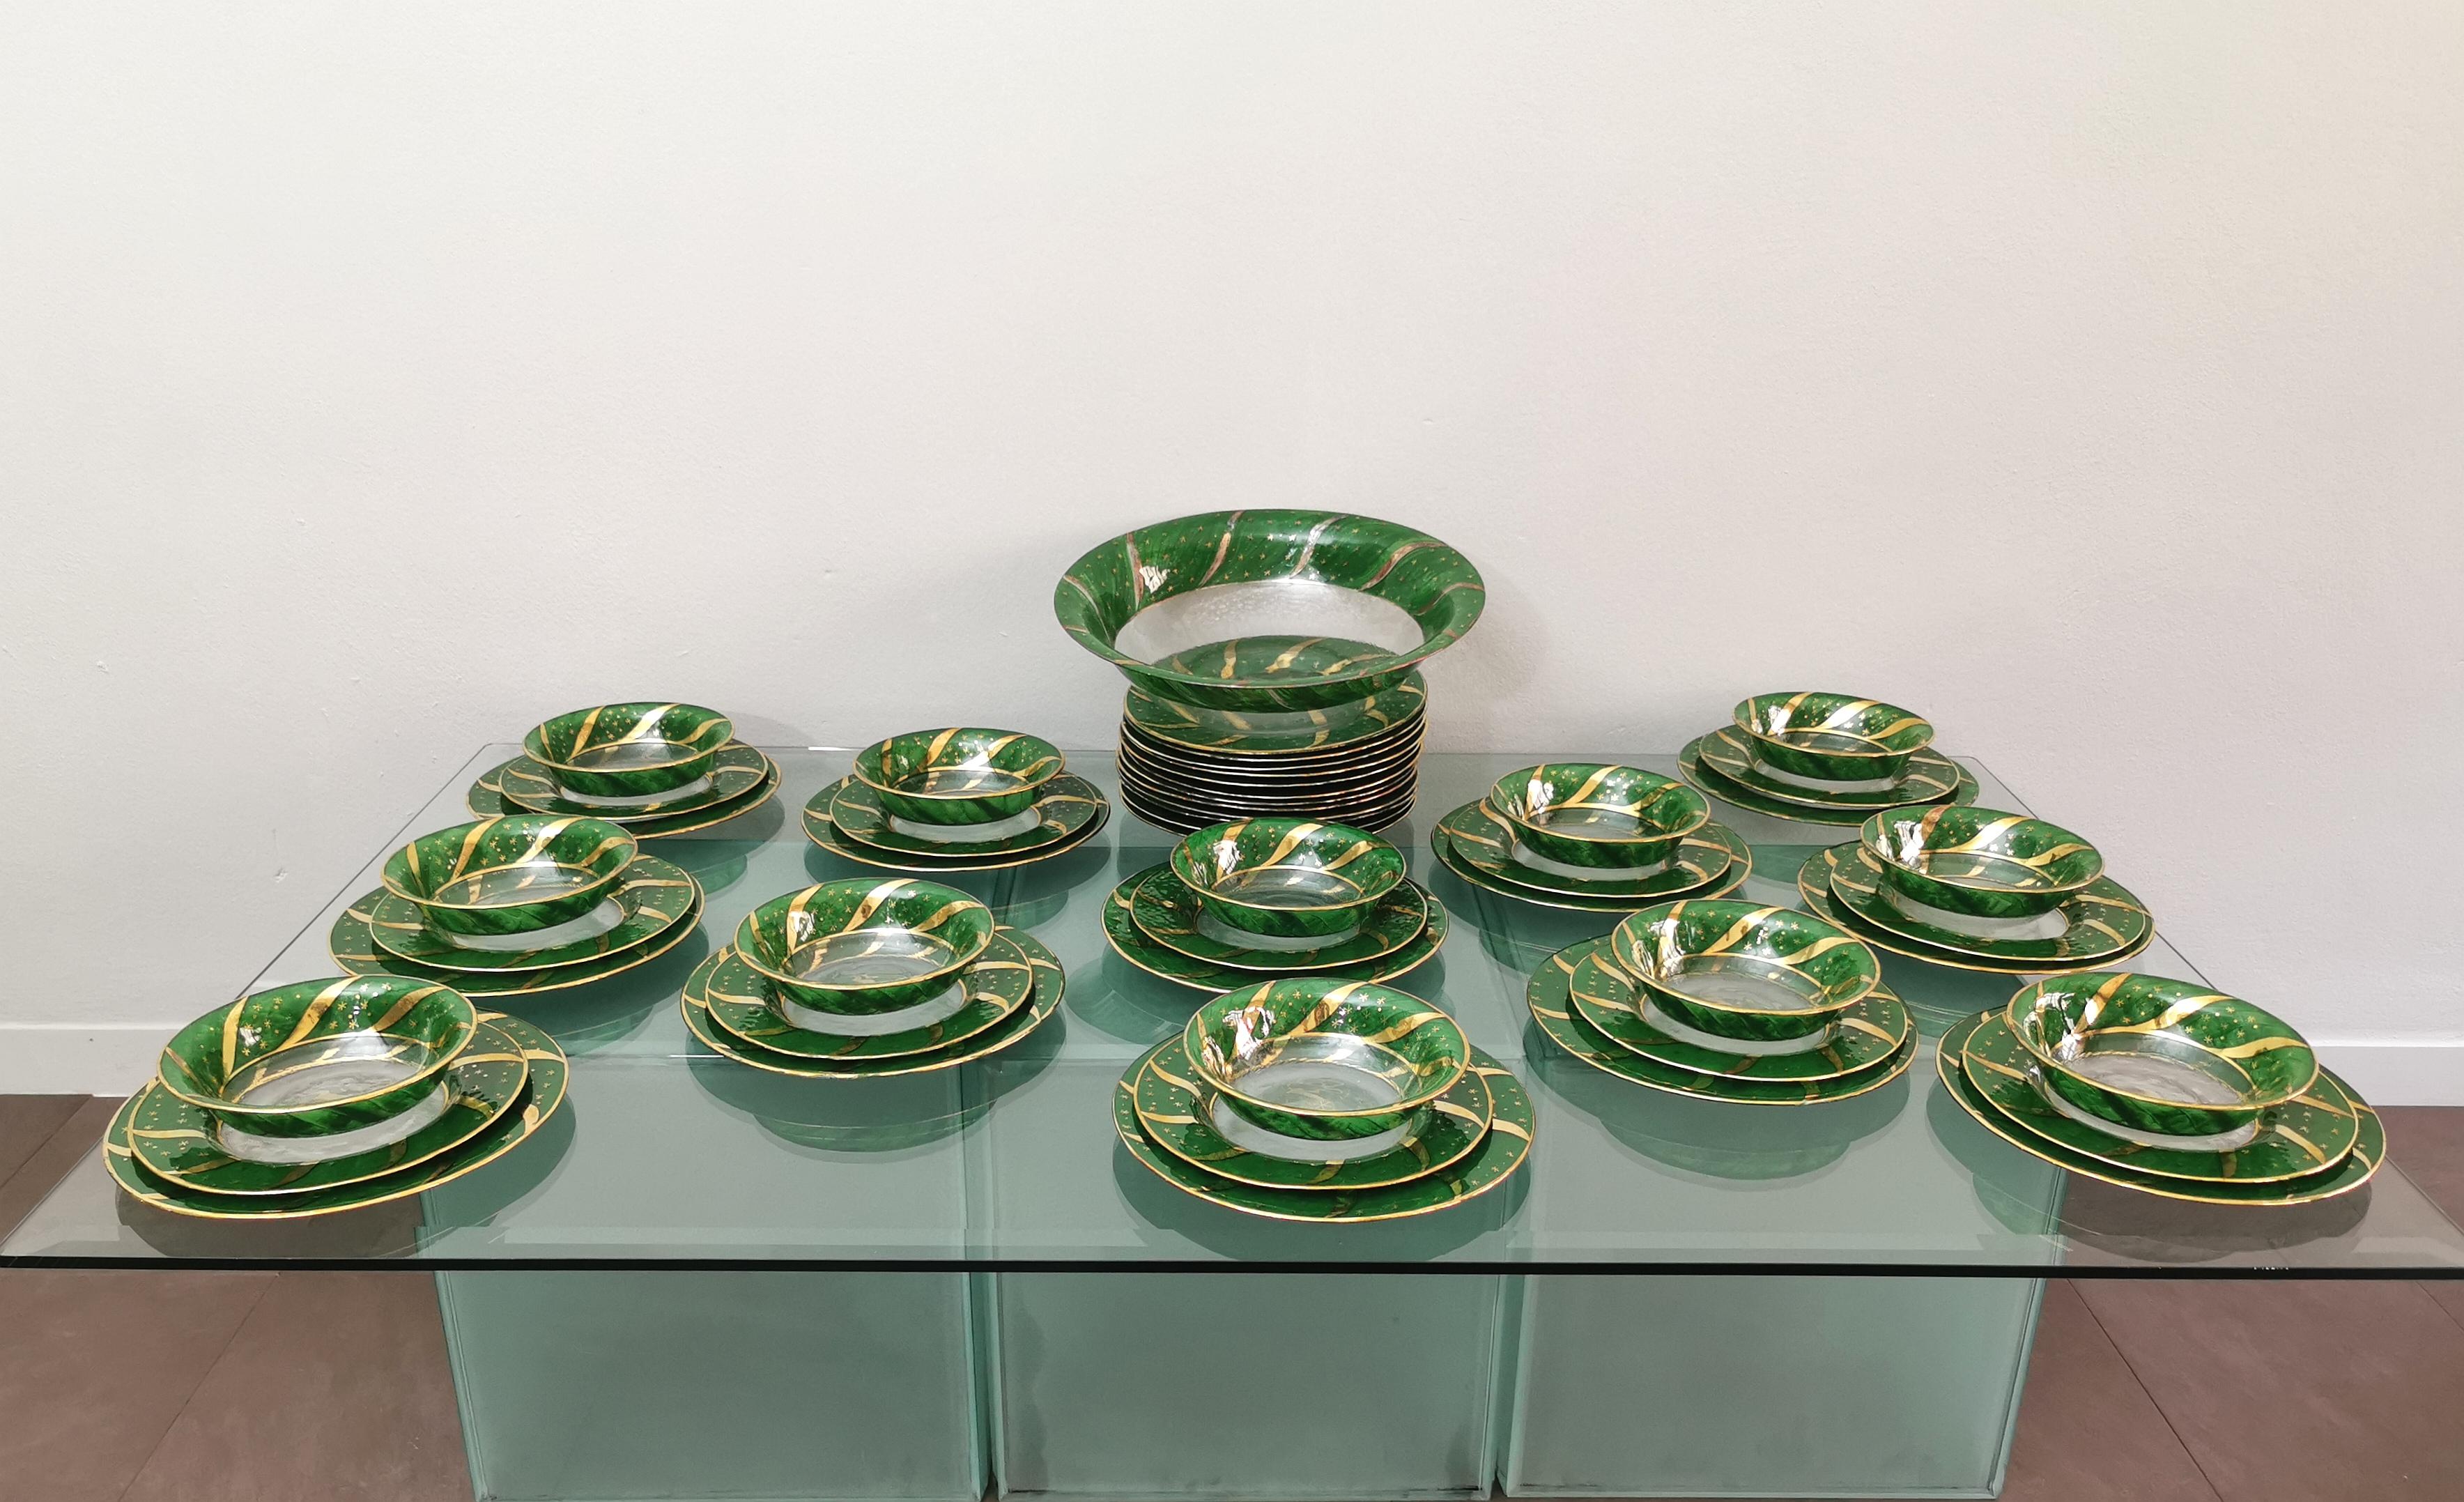 Elegant Christmas-themed dinner service in glass decorated in shades of green and gold consisting of: 24 dinner plates, 12 soup plates, 12 bowls and a soup tureen, for a total of 49 pieces. Made in Italy in the 70s.




The whole service has a